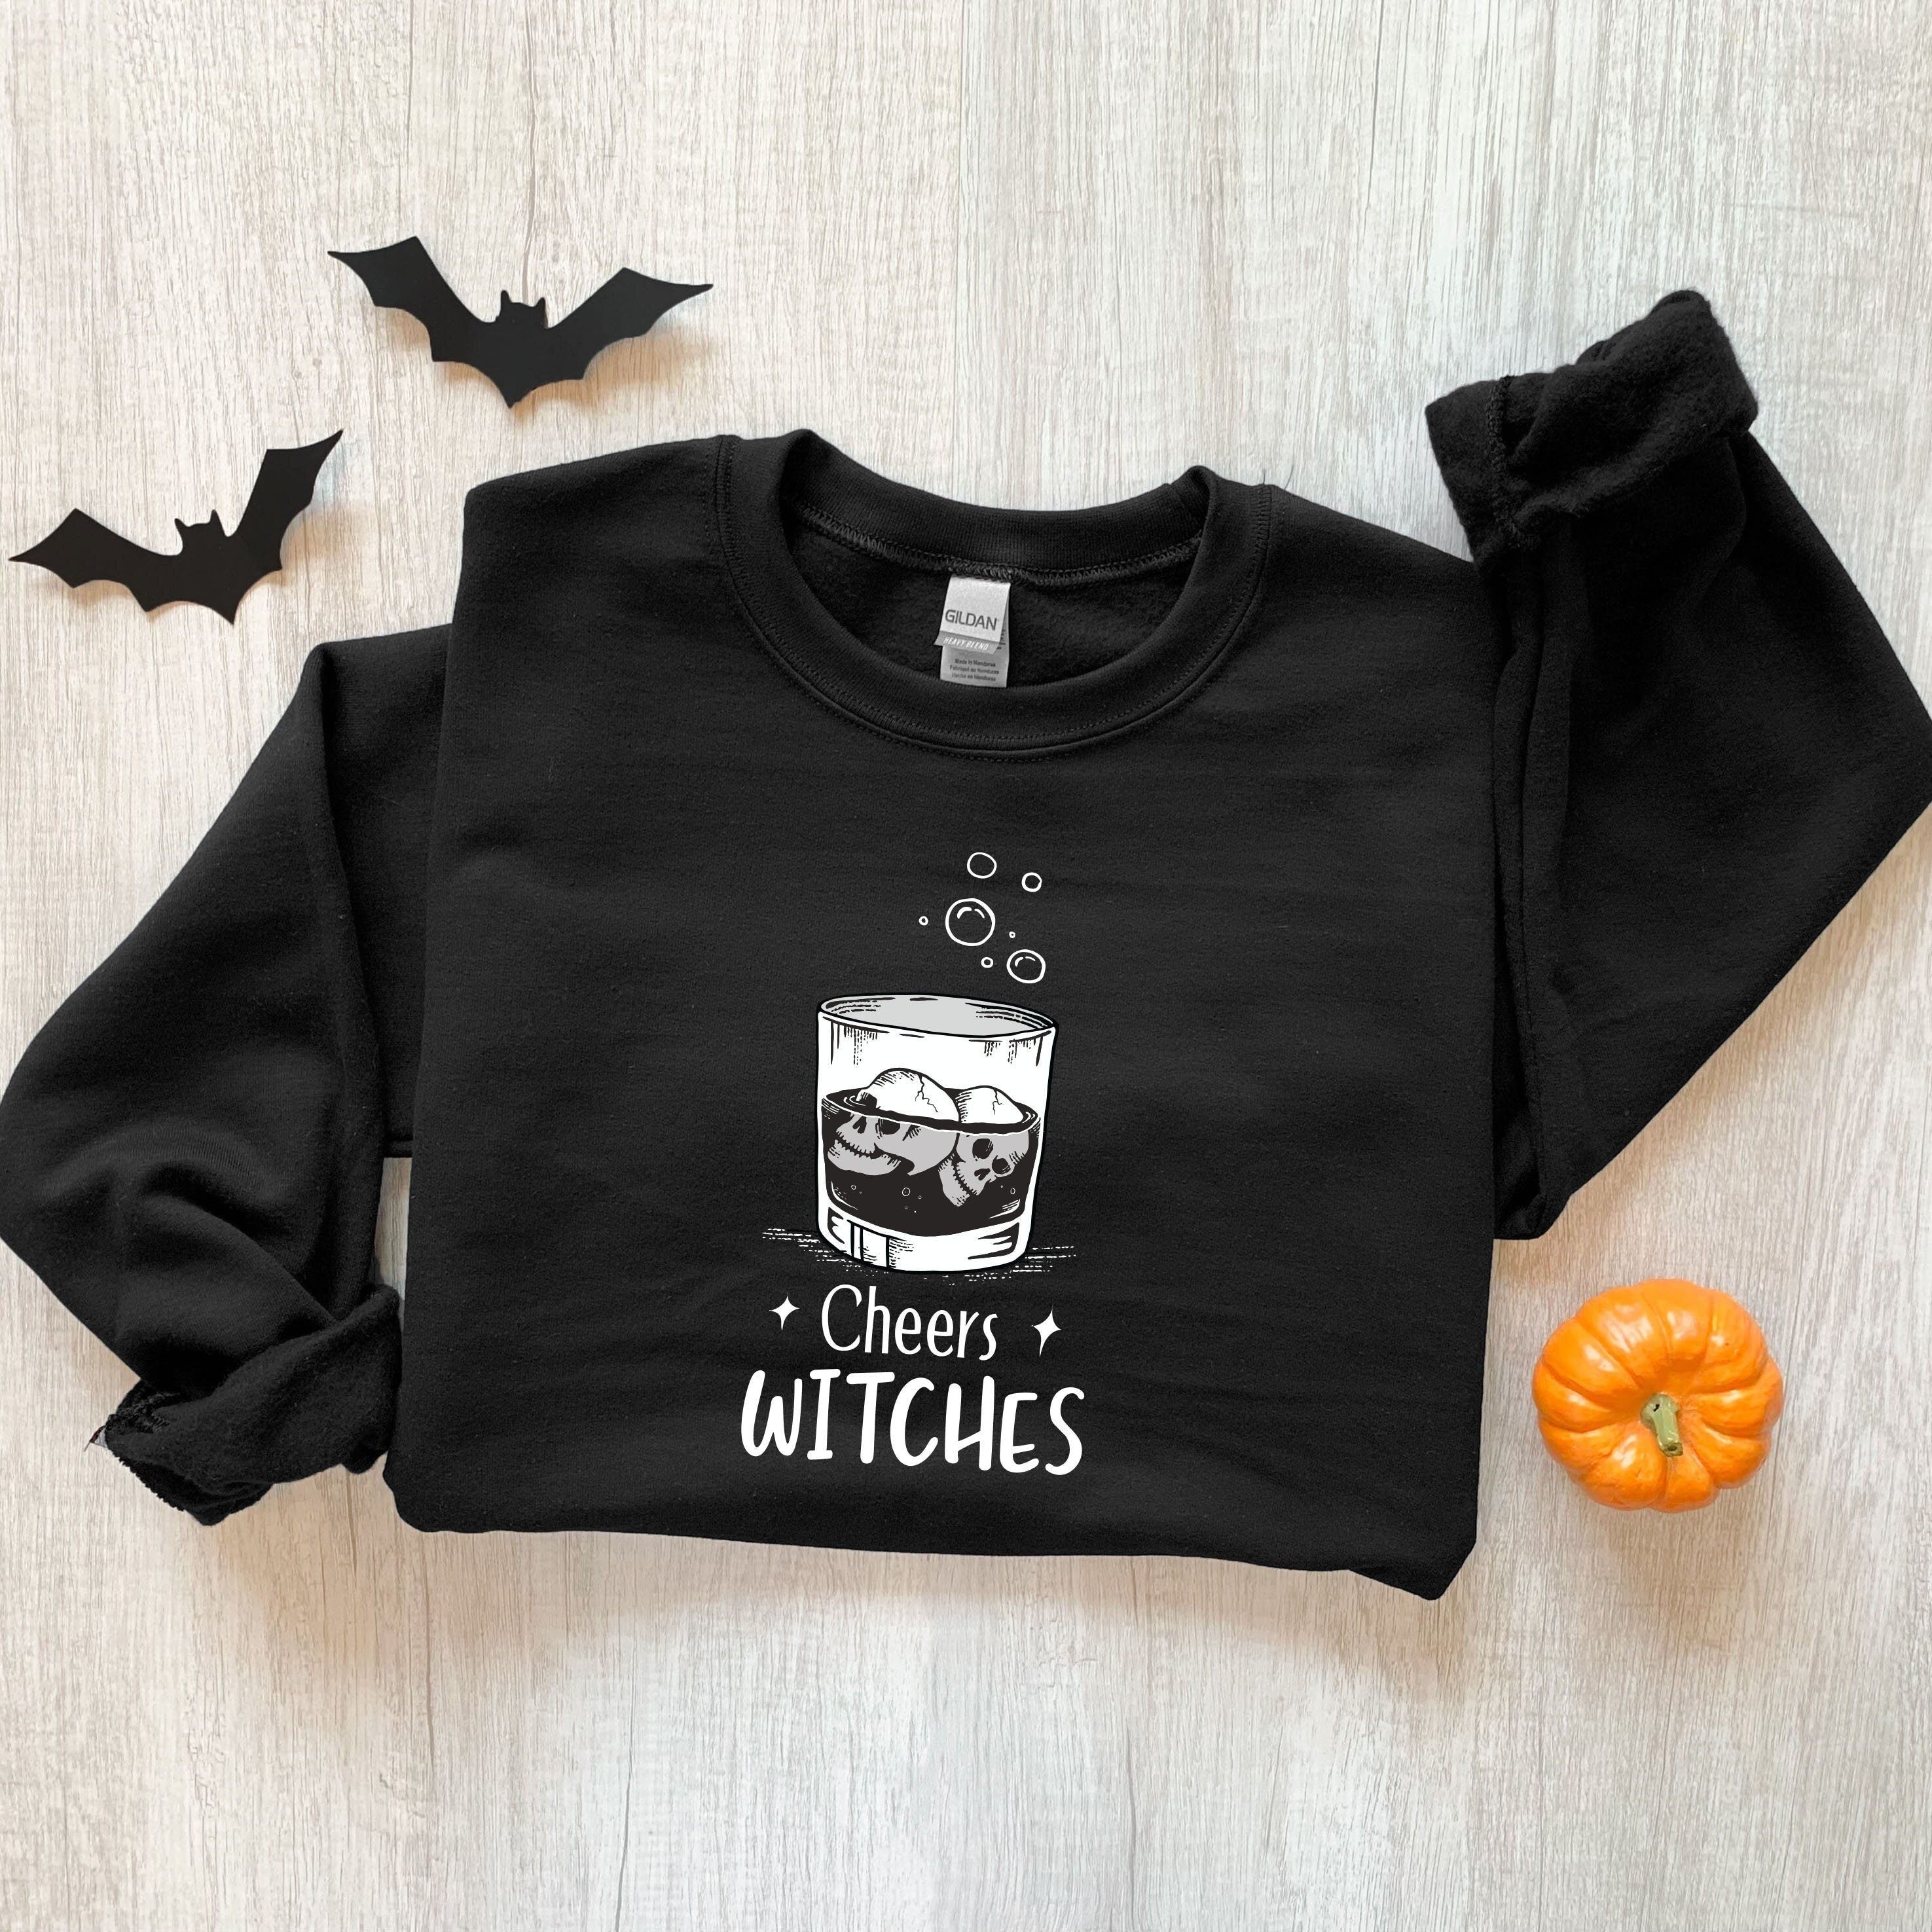 Cheers witches jumper, Funny Halloween costume for men and women